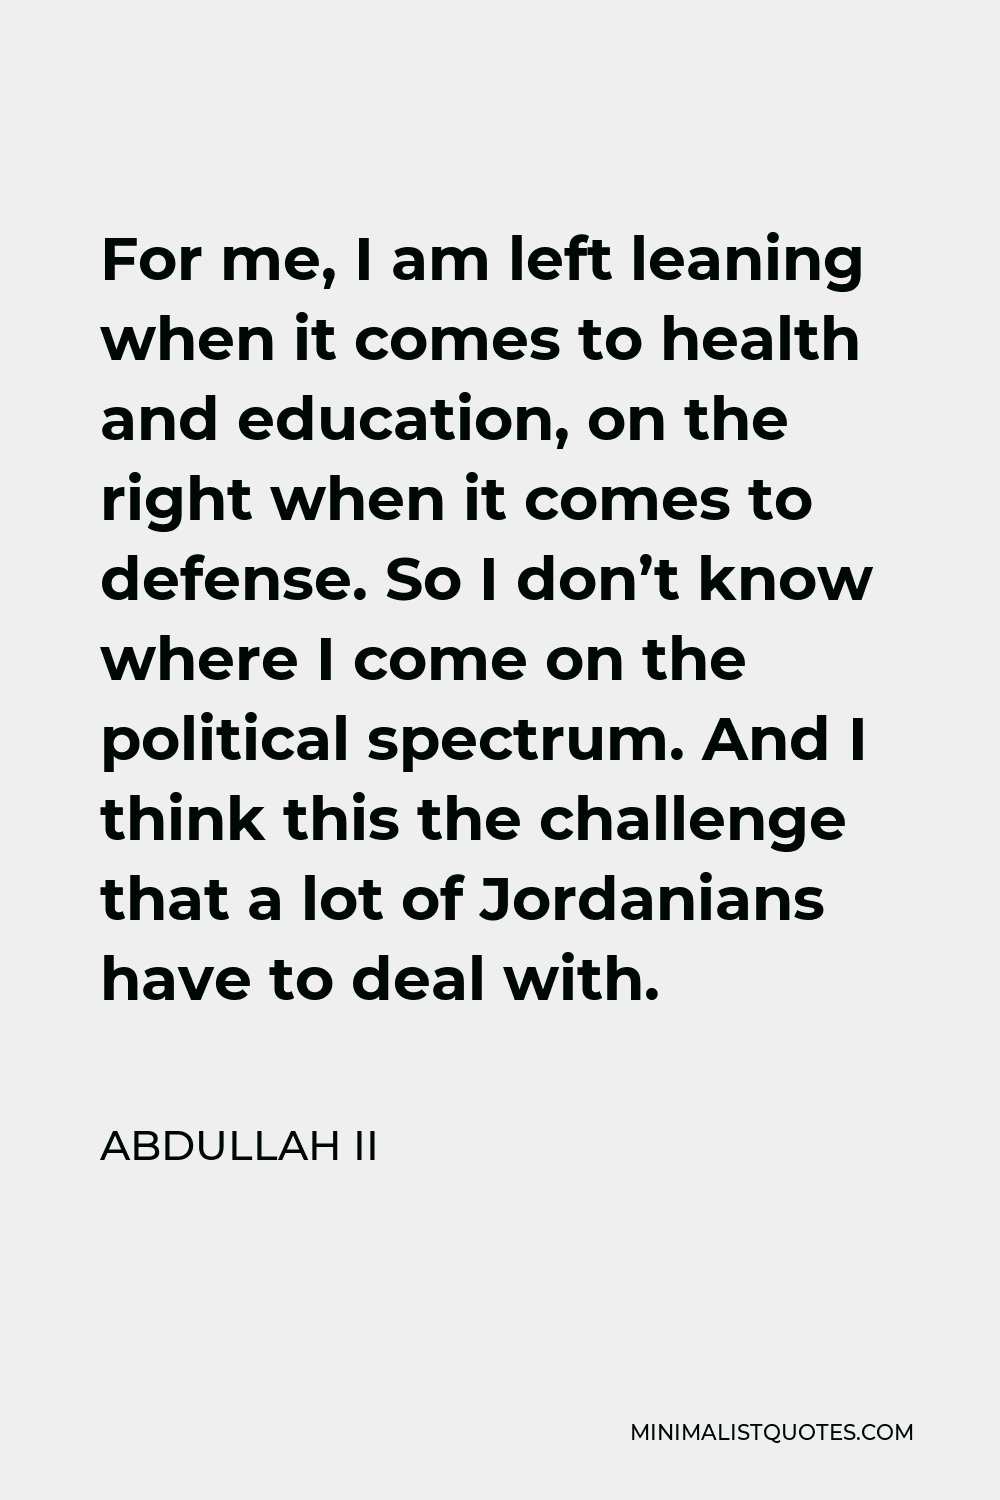 Abdullah II Quote - For me, I am left leaning when it comes to health and education, on the right when it comes to defense. So I don’t know where I come on the political spectrum. And I think this the challenge that a lot of Jordanians have to deal with.